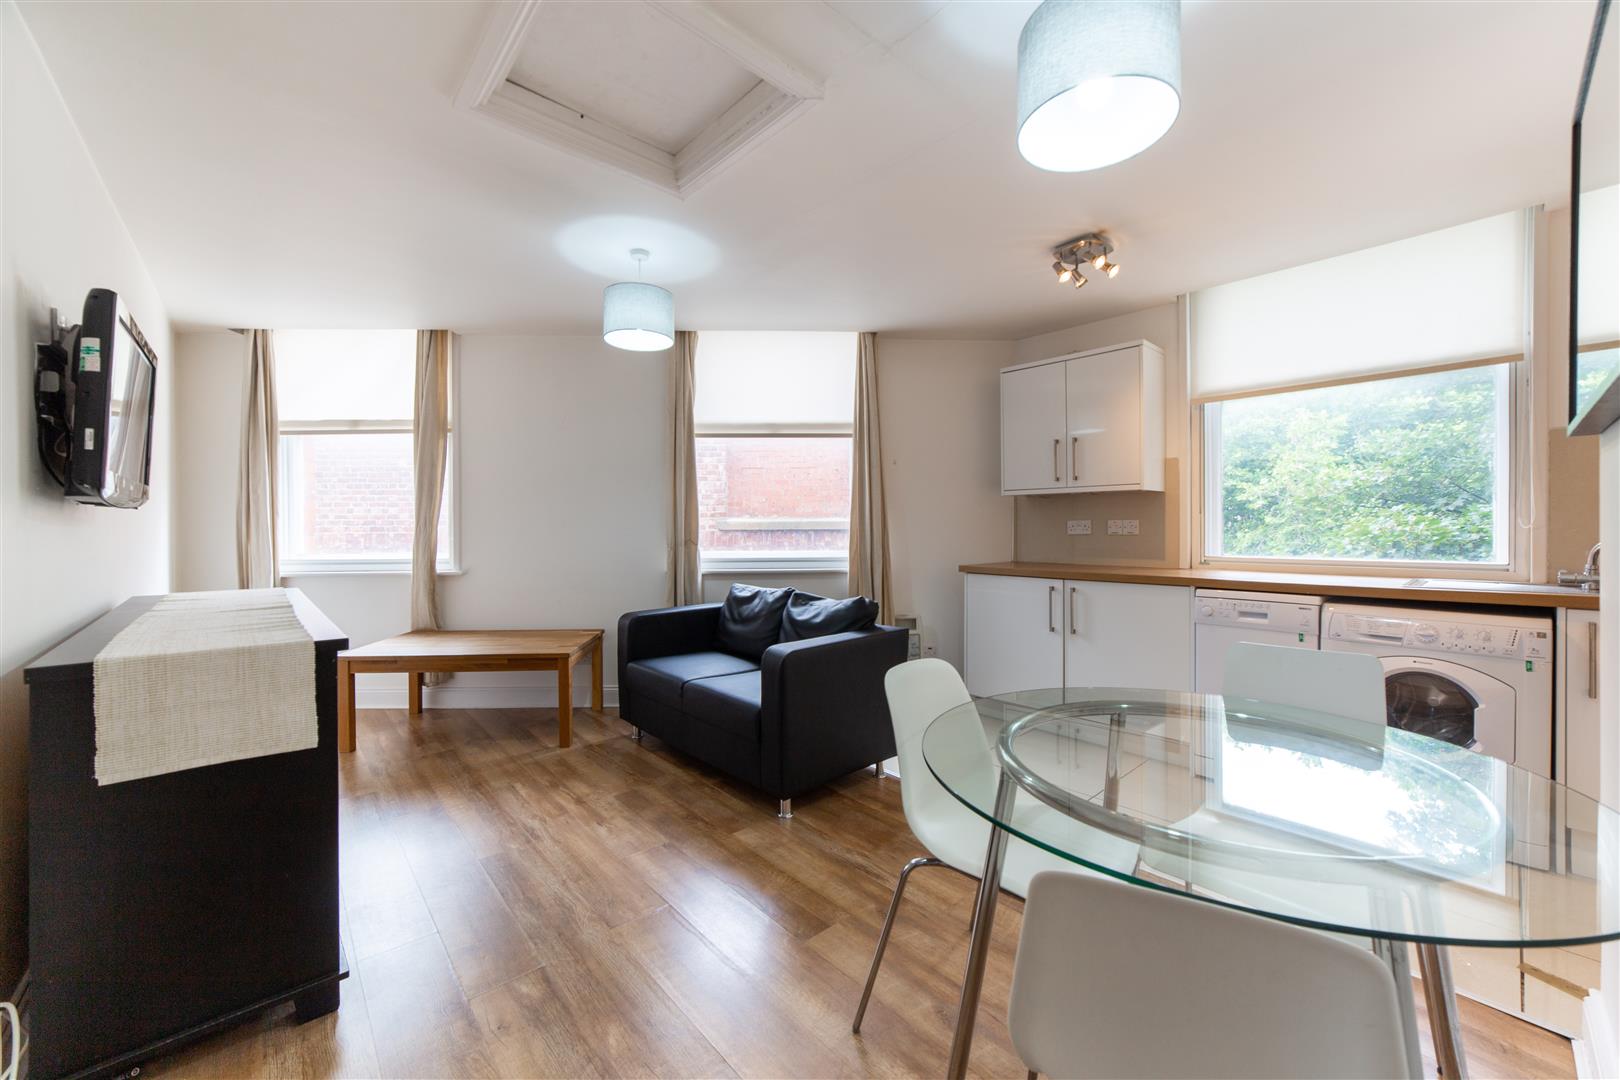 1 bed apartment to rent in St Andrews Street, City Centre, NE1 